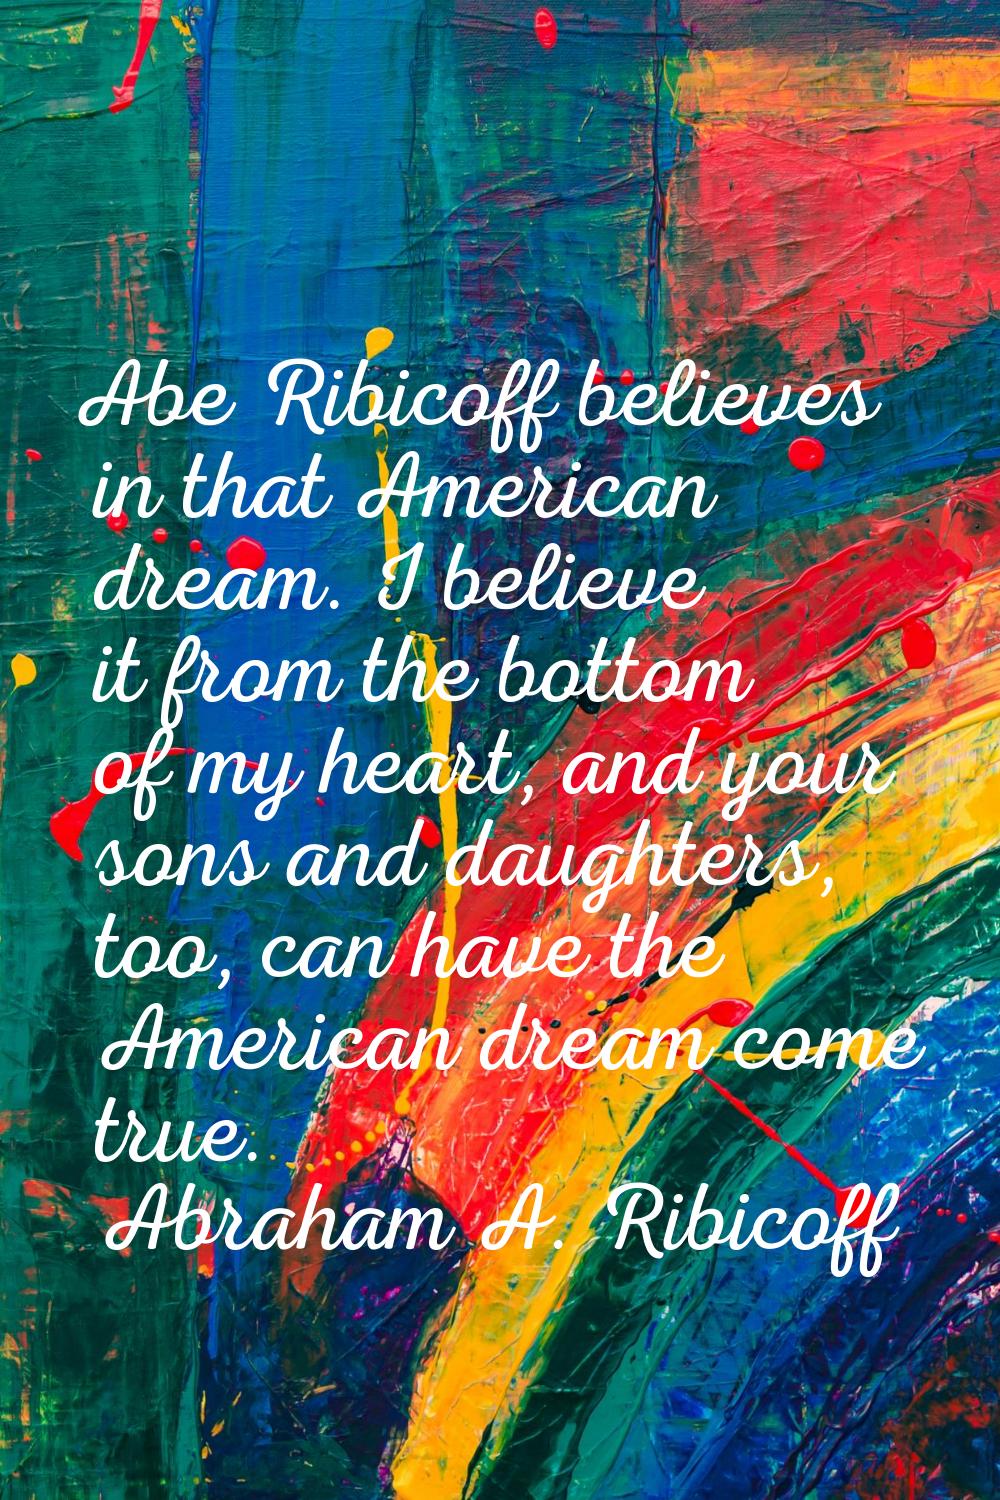 Abe Ribicoff believes in that American dream. I believe it from the bottom of my heart, and your so